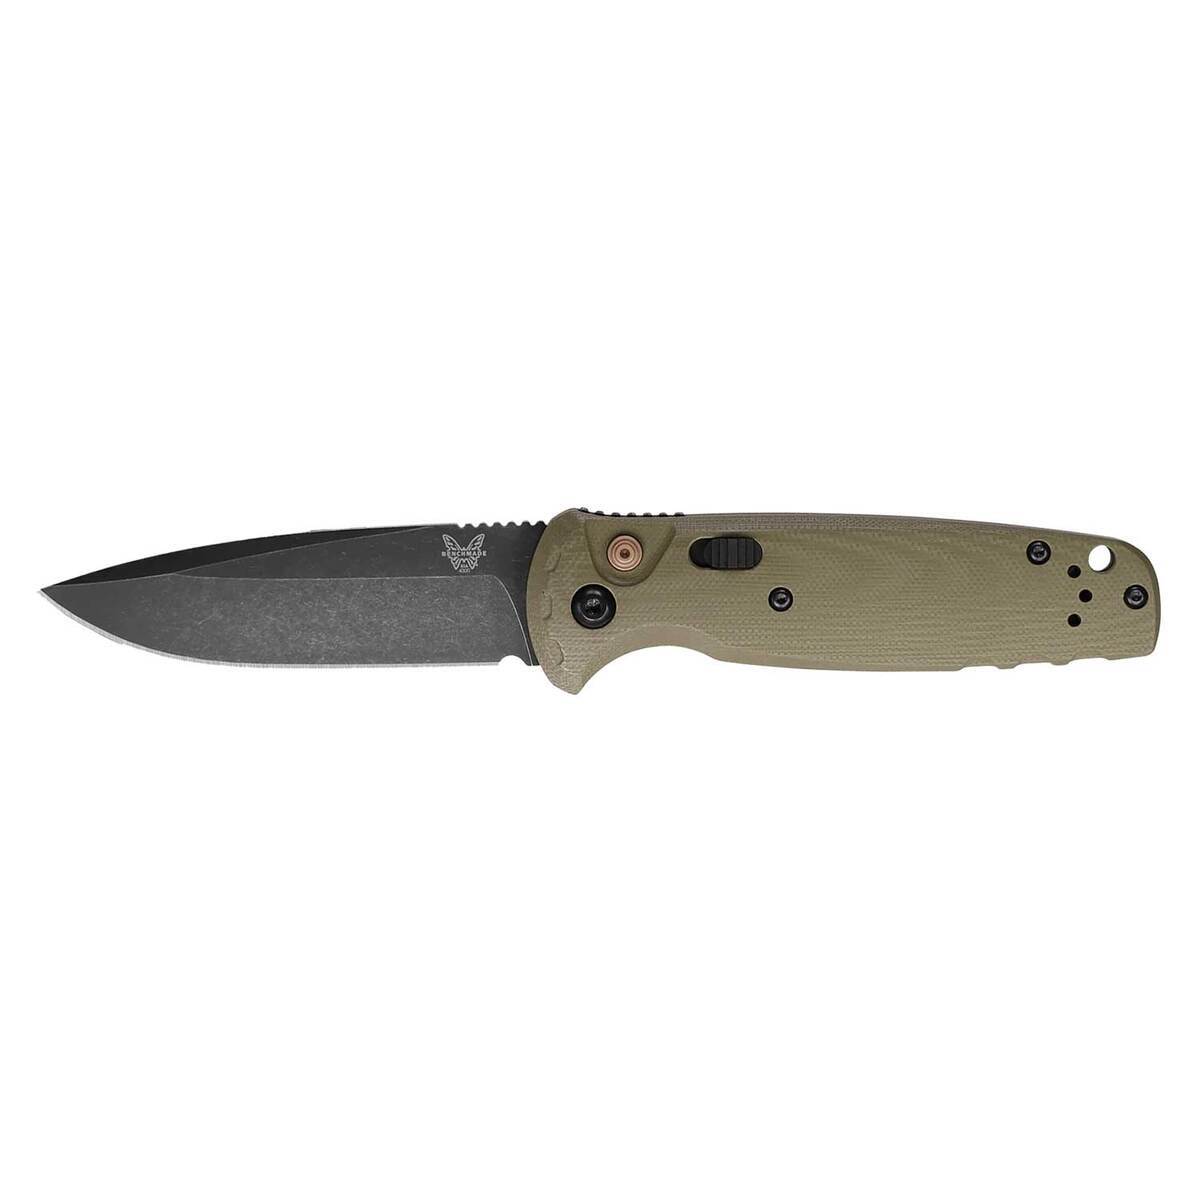 BUBBA LITHIUM ION ELECTRIC KNIFE – Creel Outdoors